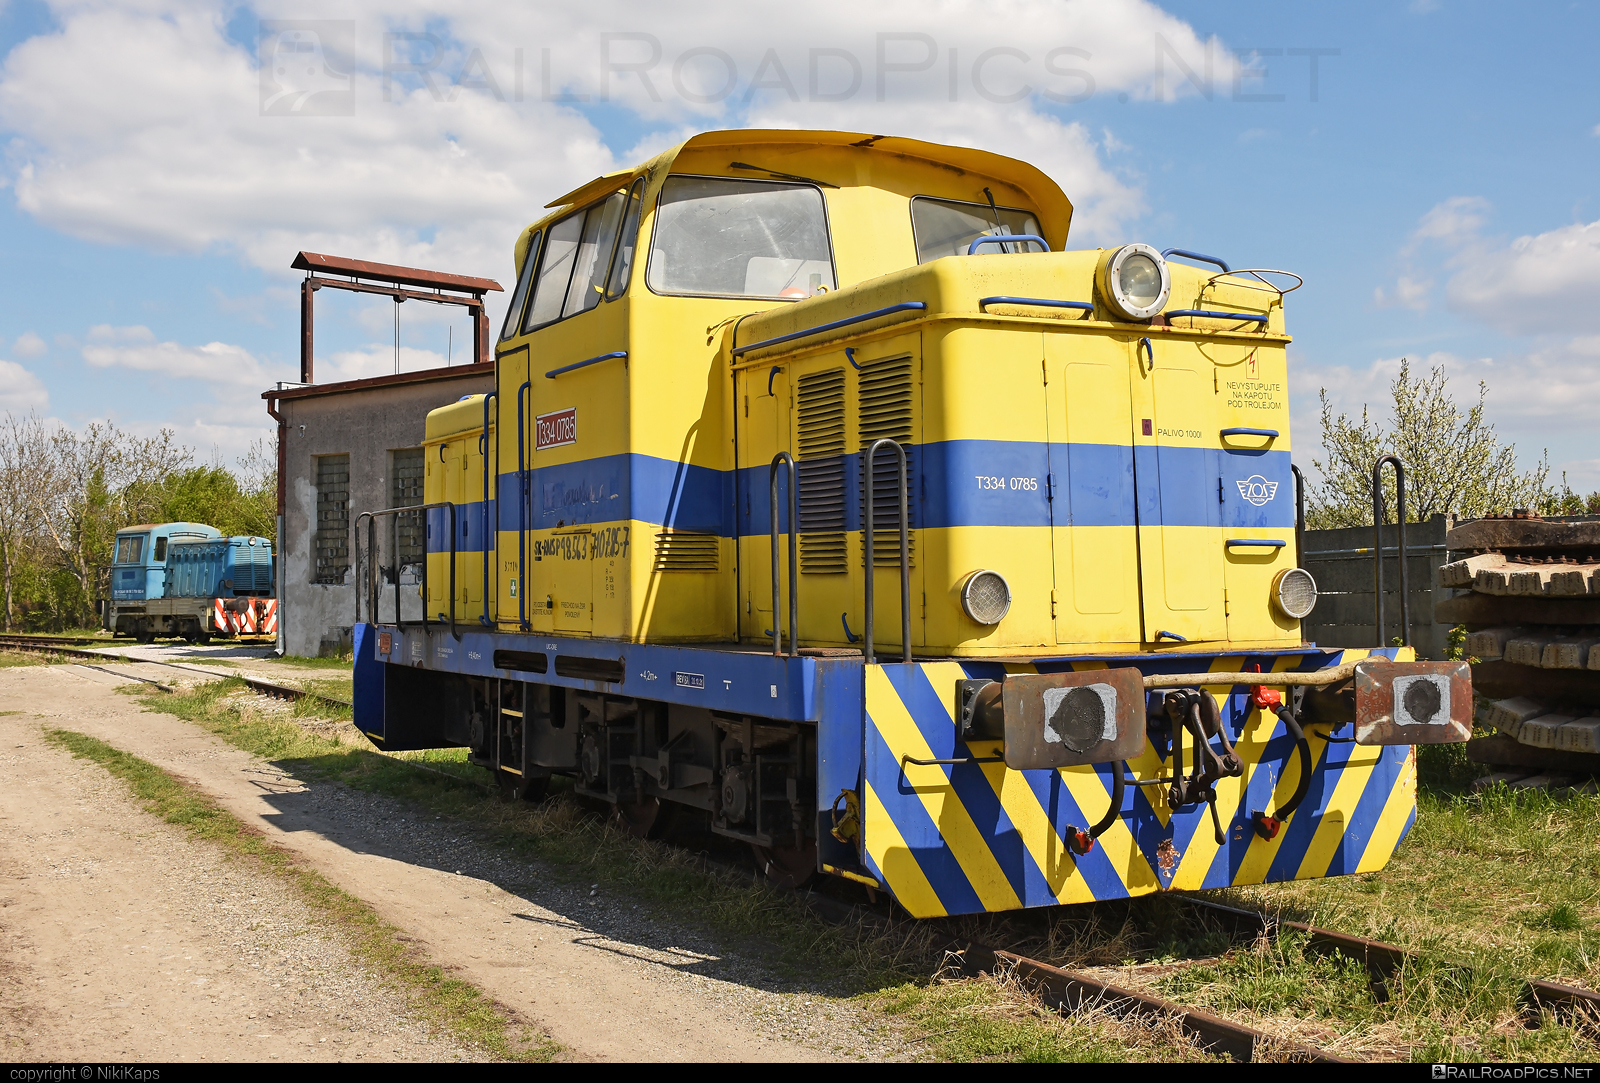 ČKD T 334.0 (710) - 710 785-7 operated by Rail Support, s.r.o. #ckd #ckd3340 #ckd710 #ckdt3340 #railsupport #rosnicka